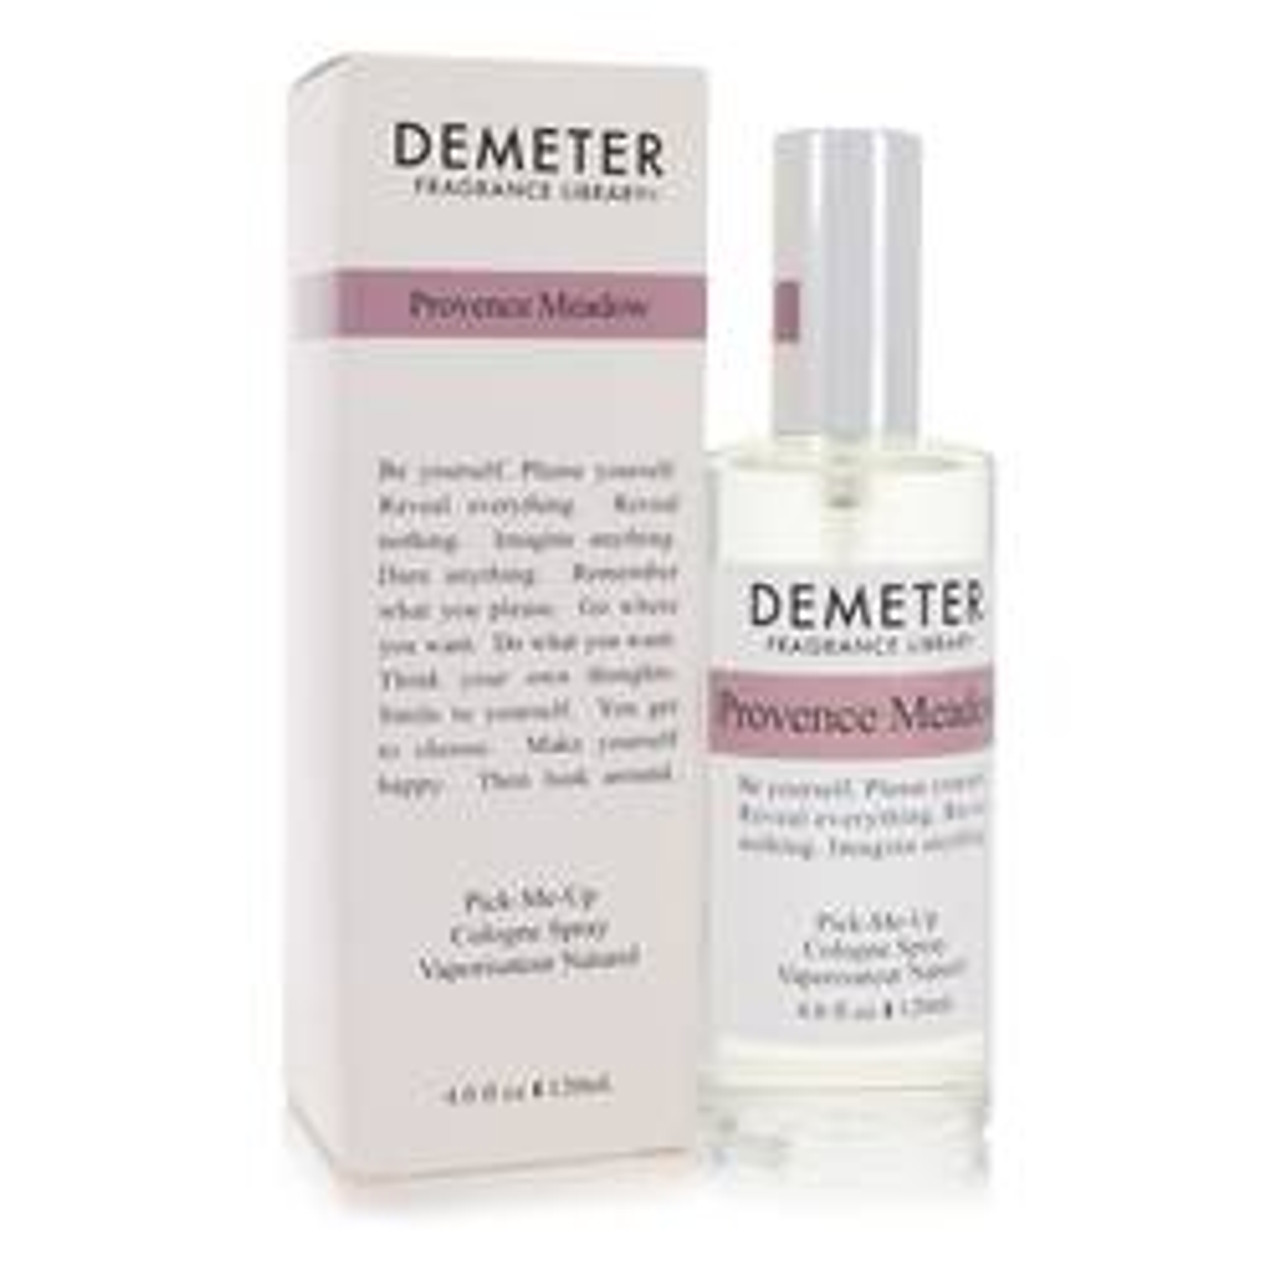 Demeter Provence Meadow Perfume By Demeter Cologne Spray 4 oz for Women - [From 79.50 - Choose pk Qty ] - *Ships from Miami